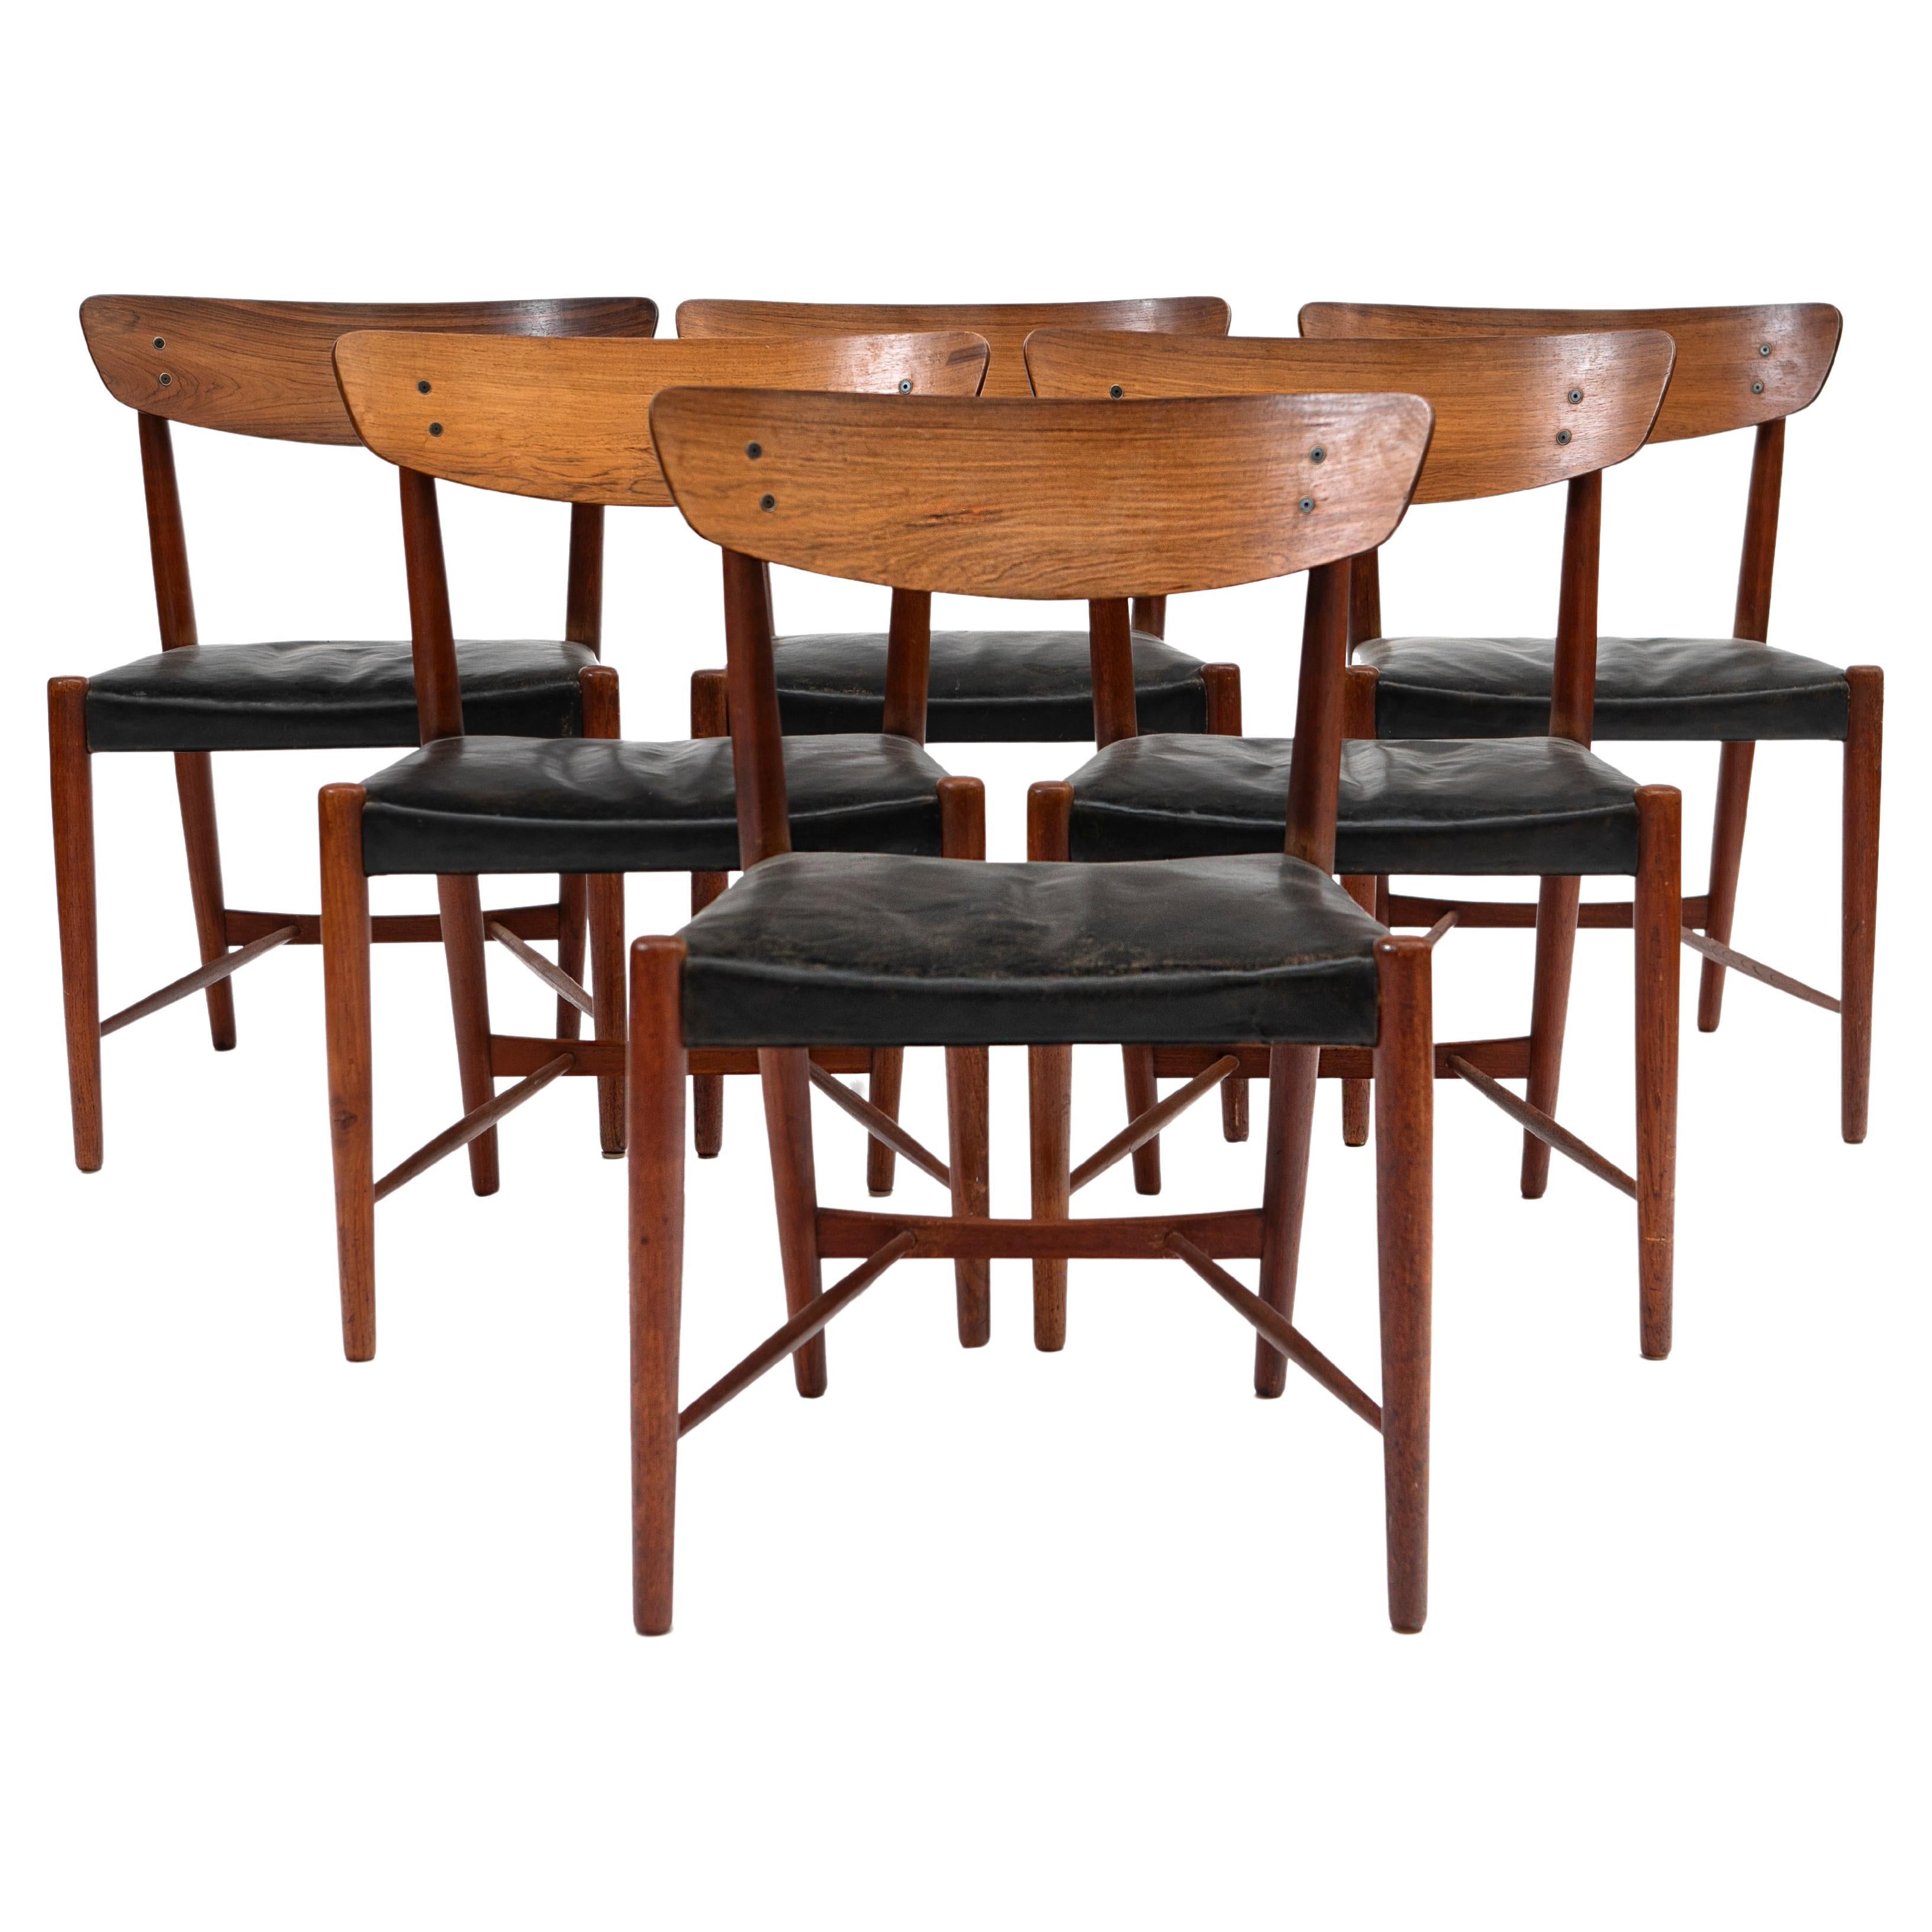 A rare set of six dinning chairs designed by the Danish designer Ib Kofod-Larsen.
Manufactured by Christensen & Larsen Cabinetmakers, Denmark, 1954.
The frames are made of Rio rosewood and the seats are upholstered in black leather.
Price is for all